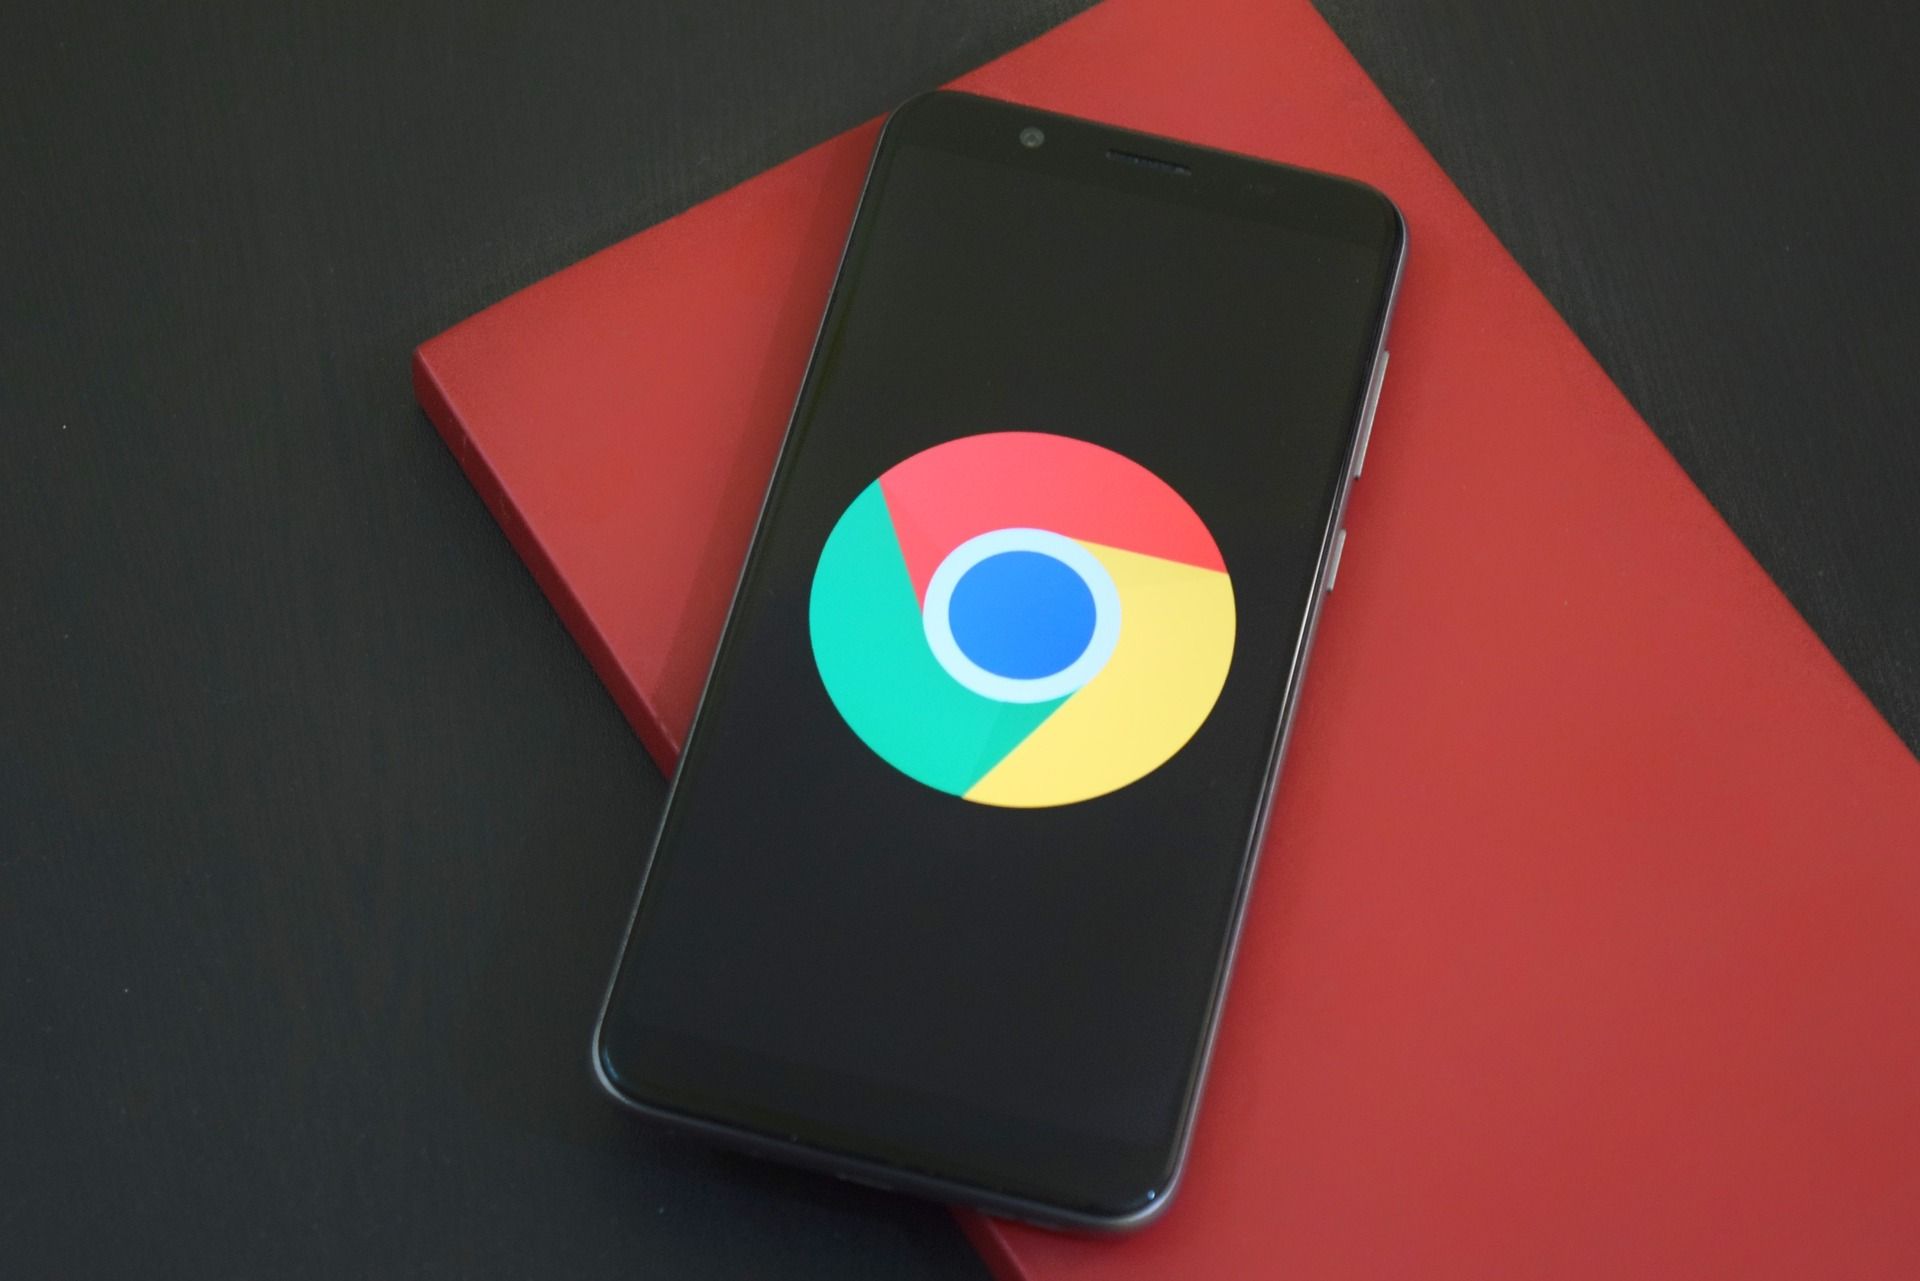 chrome logo on phone display laying on red book cover